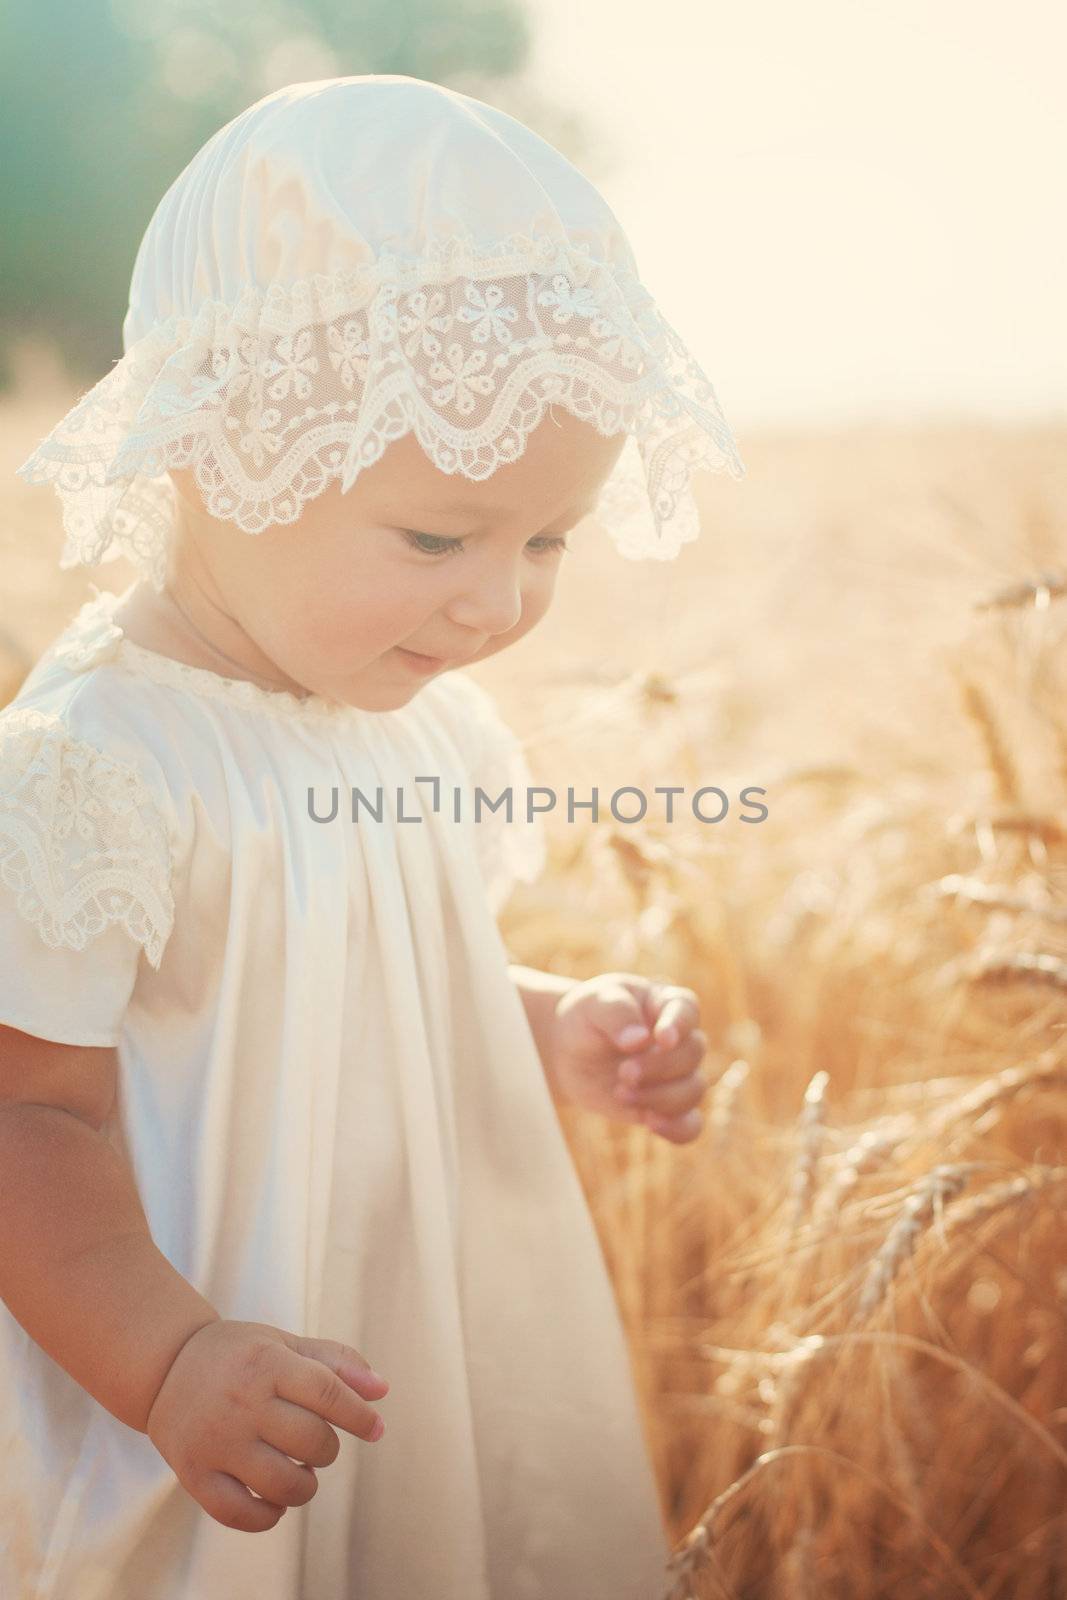 Laughing kid in sunny wheat  field in vintage dress